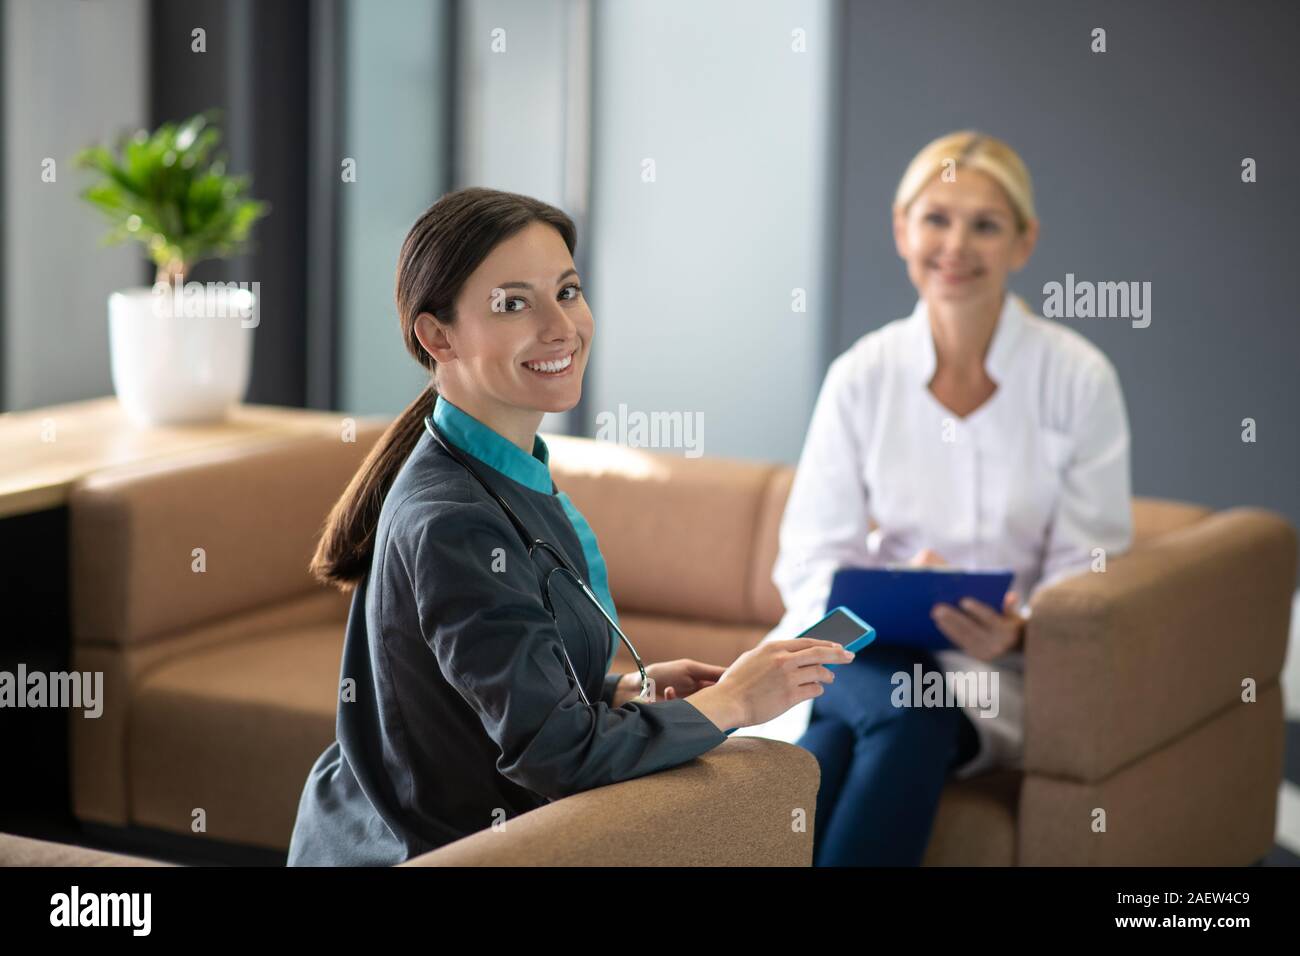 Dark-haired young female intern feeling good at work Stock Photo